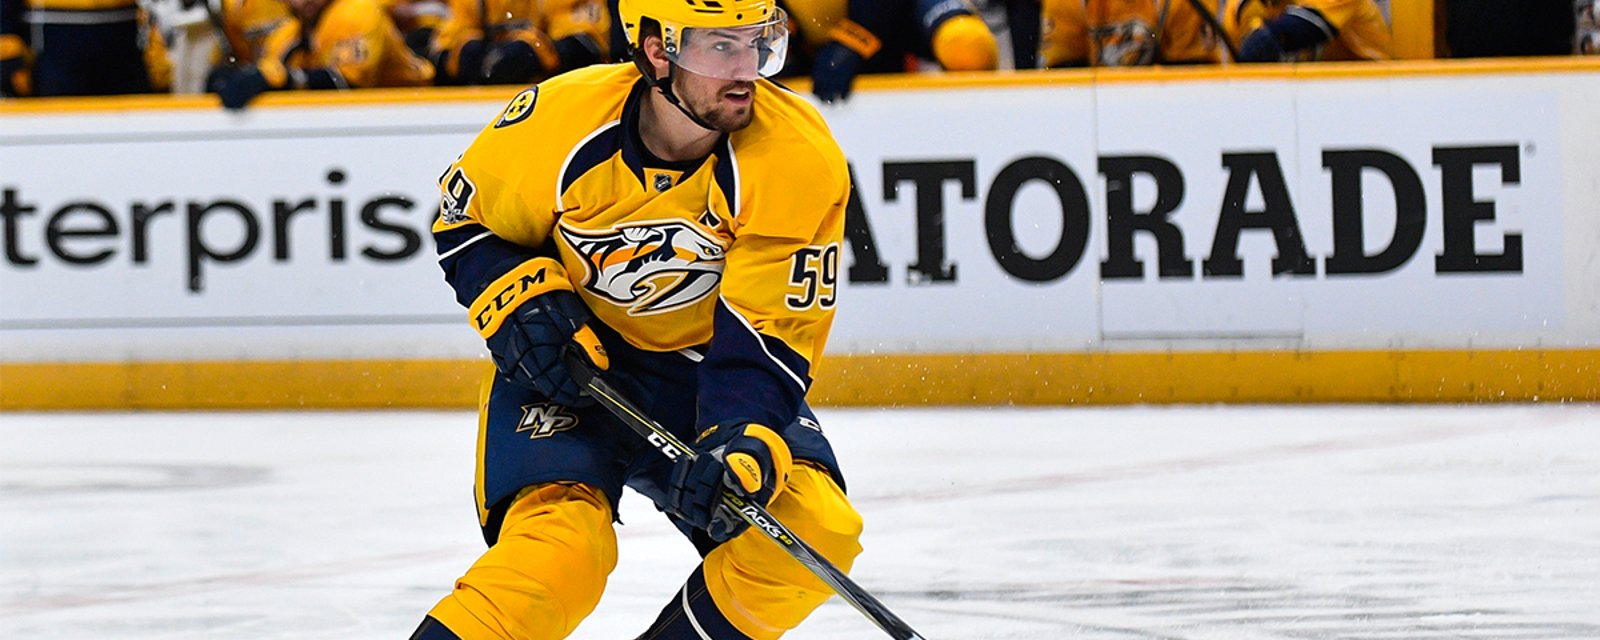 Your Call: Who should be the next Preds captain?